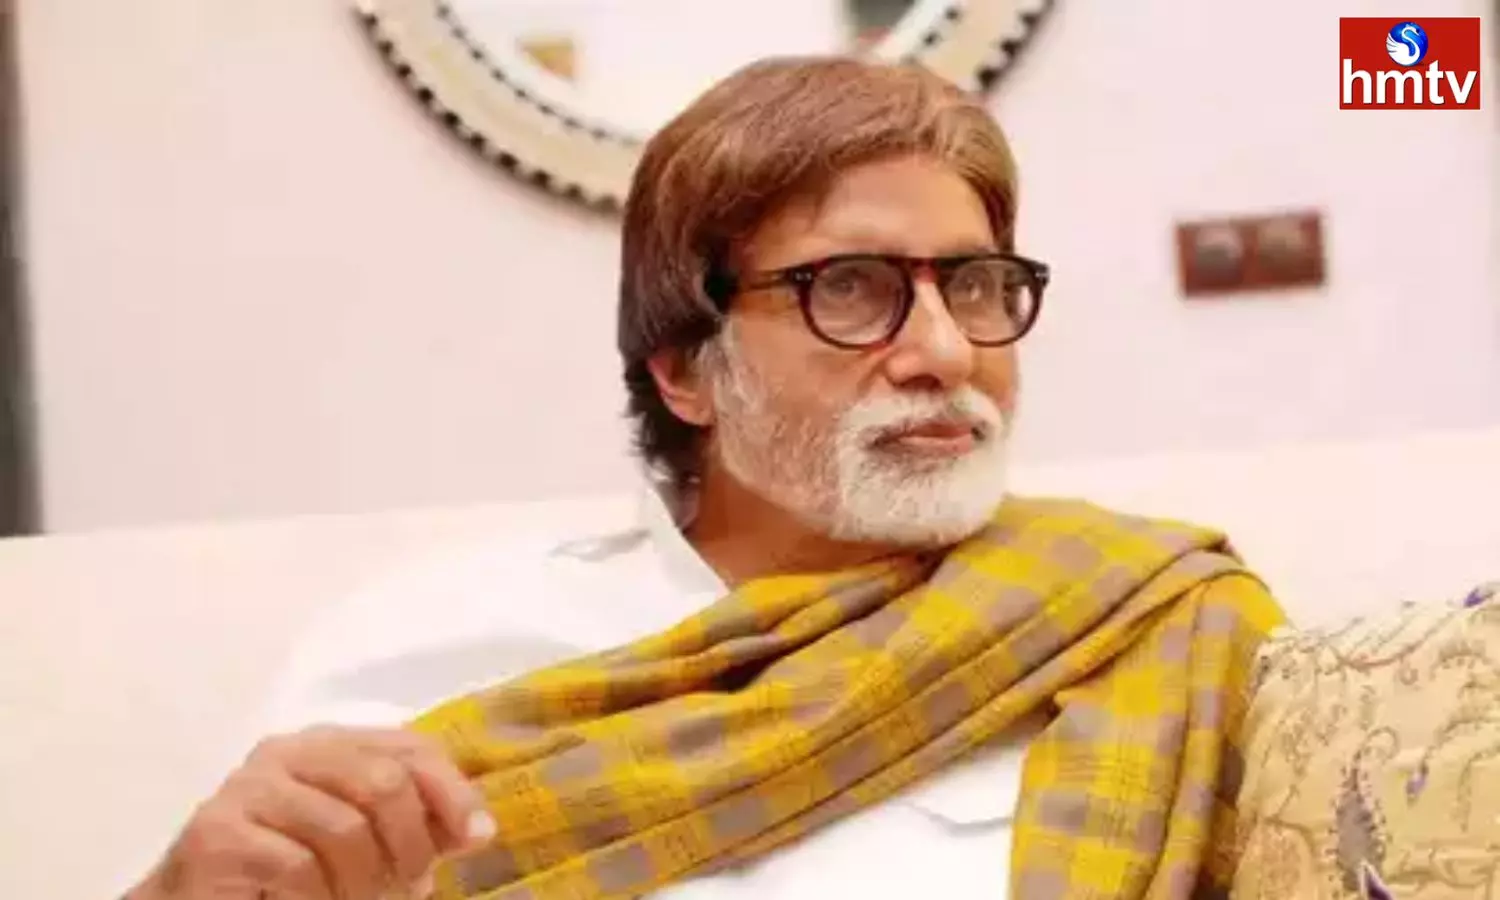 Amitabh Bachchan says he didnt count but just gave some money to a girl selling roses